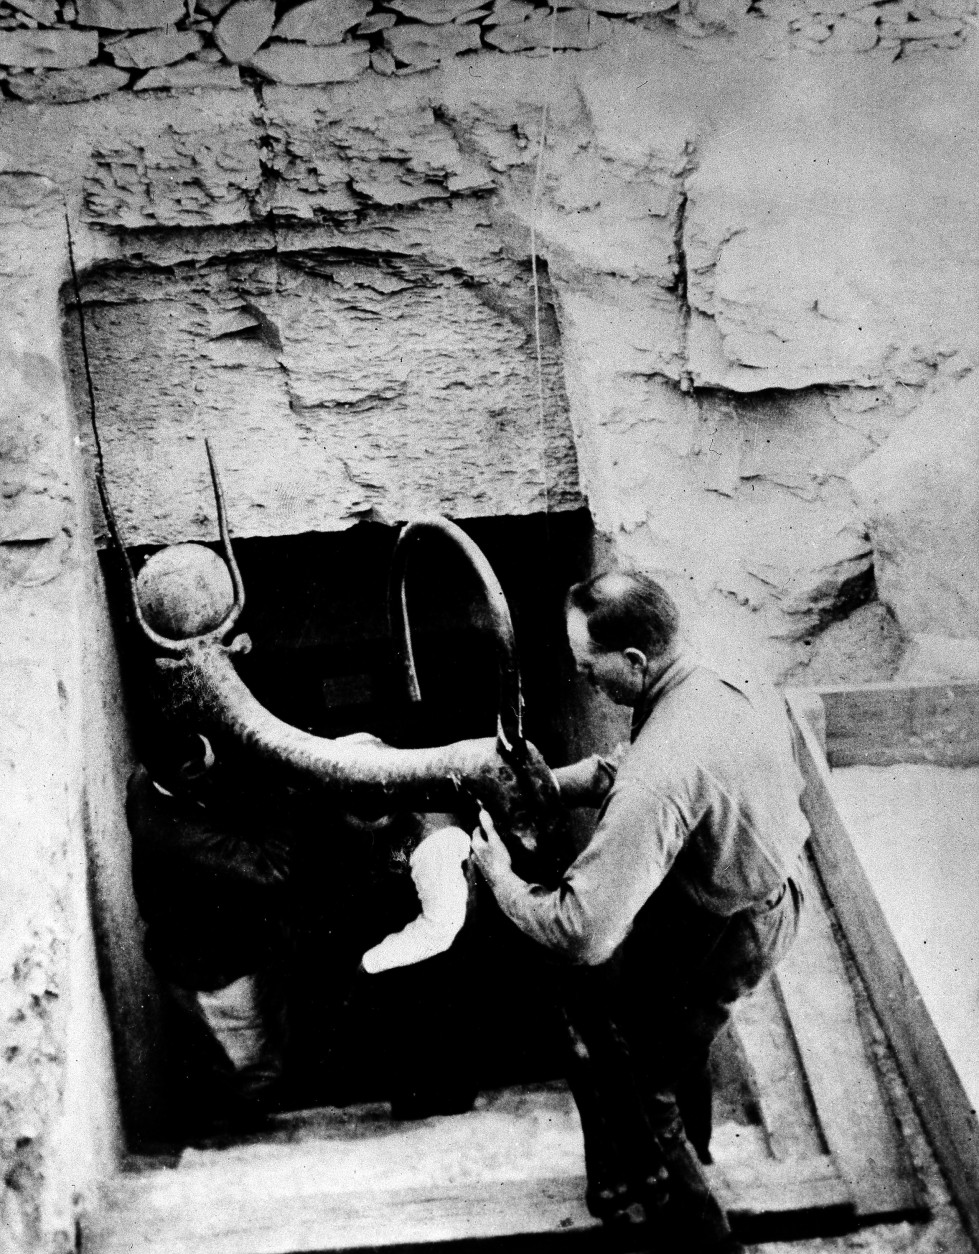 Workmen remove an object from  the tomb of King Tut in the Valley of the Kings, Luxor, Egypt, Feb. 1923.  (AP Photo)